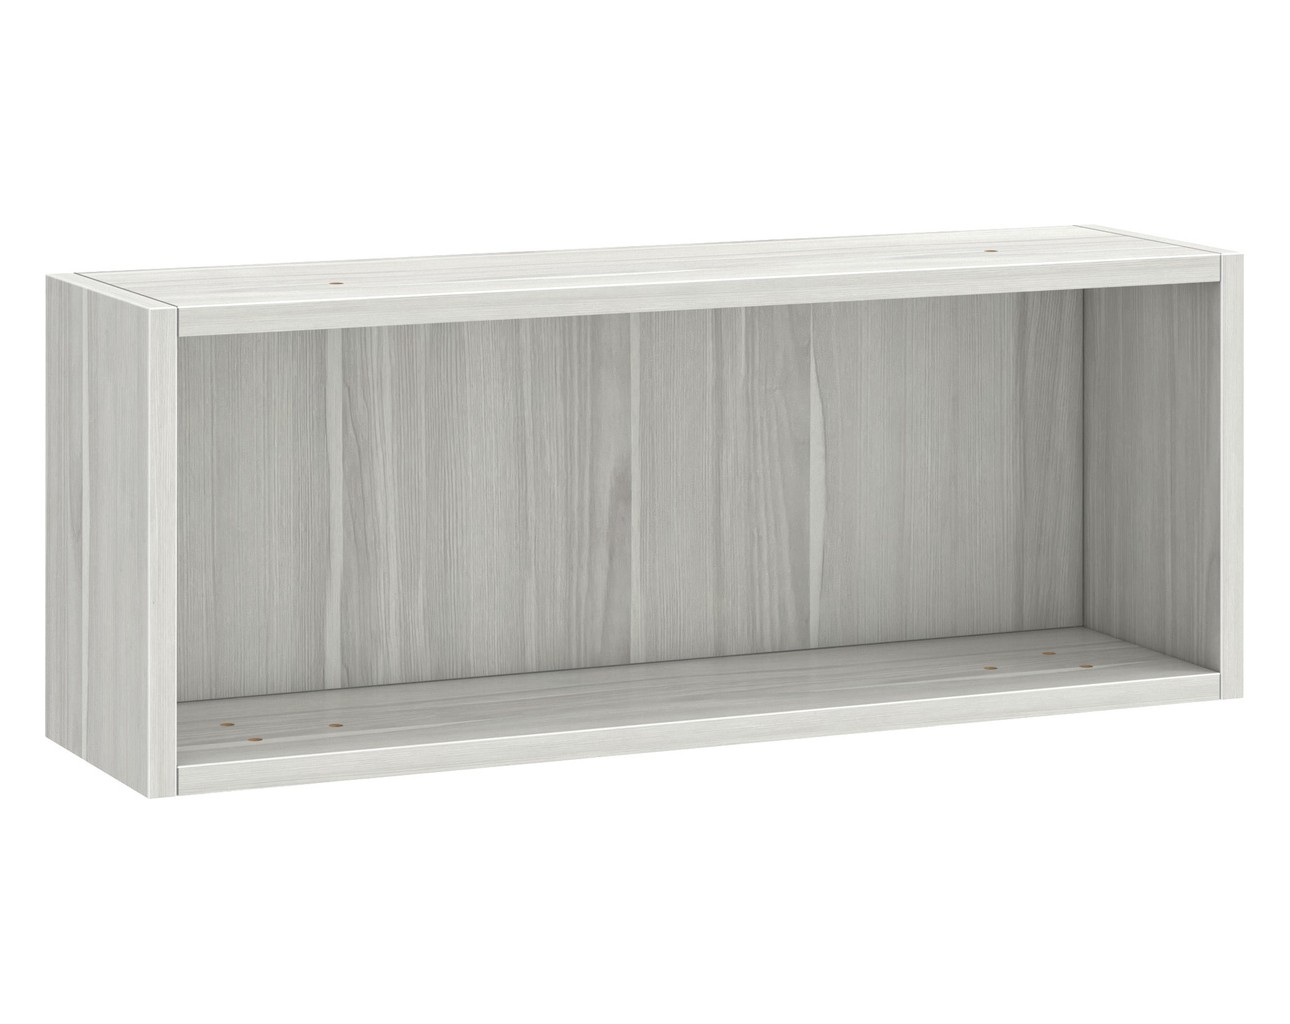 Classic Open Wall-Mounted Hutch in Silver Birch Finish